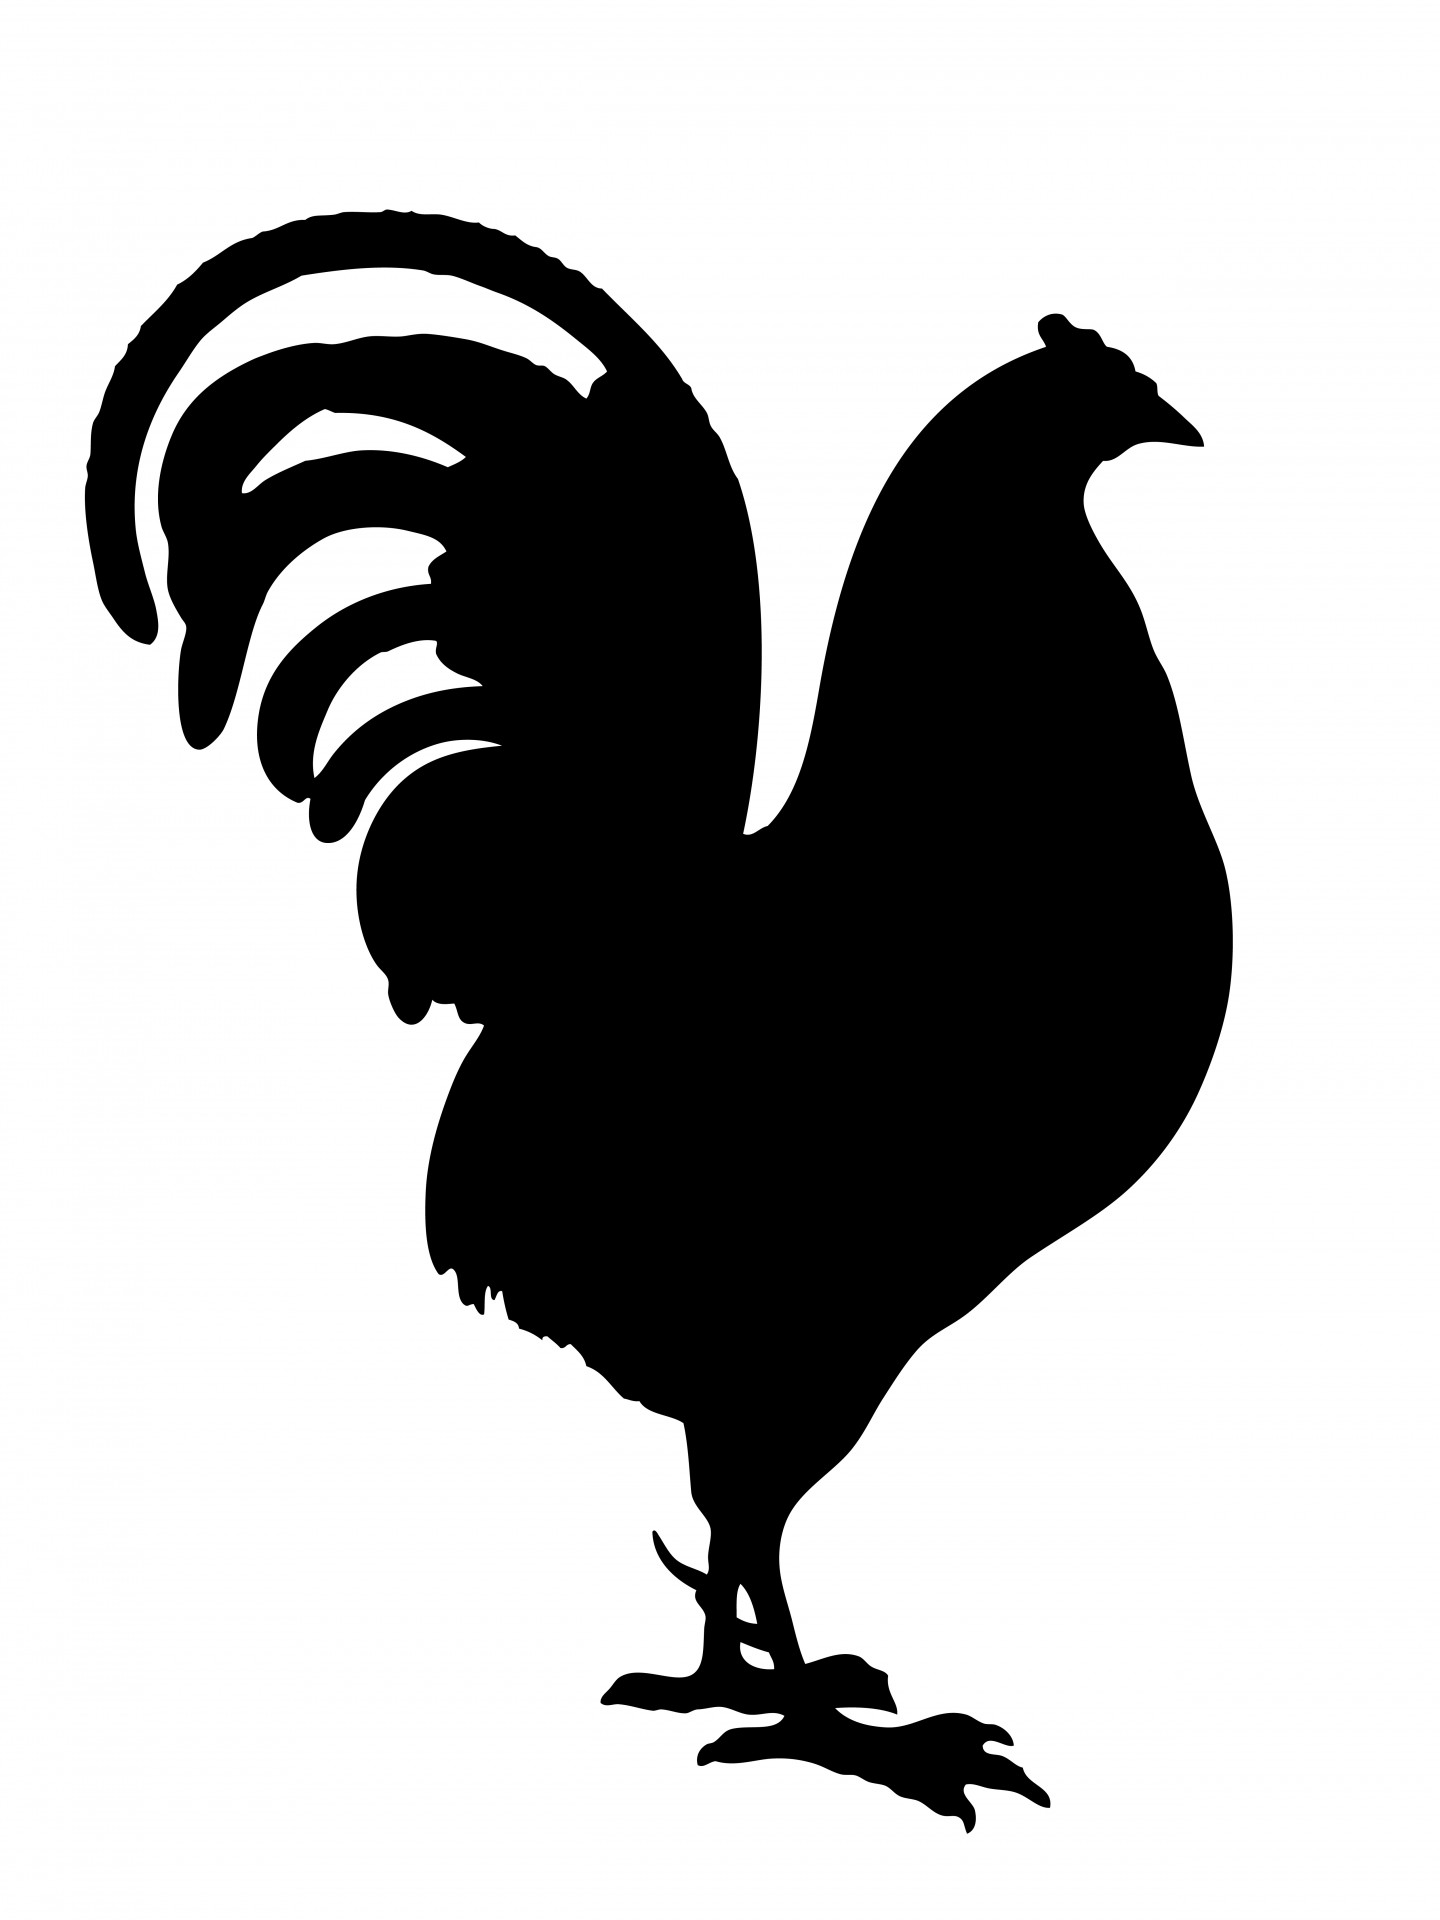 Rooster Black Silhouette Stock Photo Public Domain Clipart